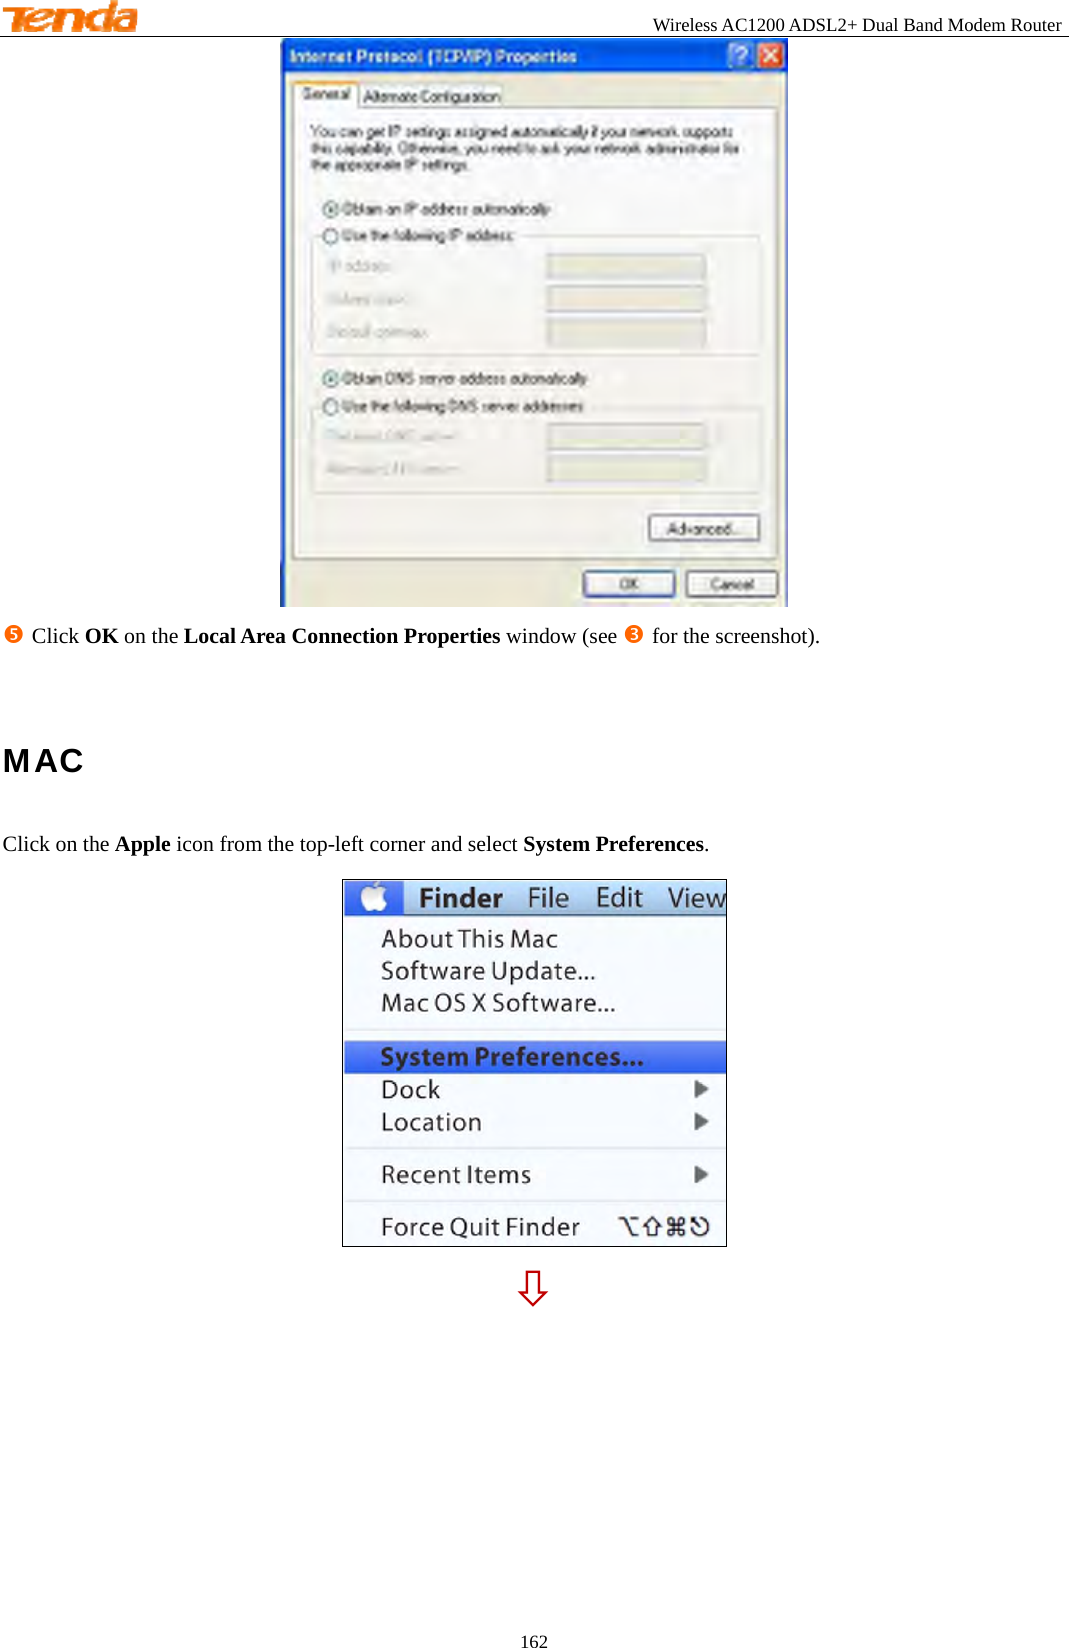                                                        Wireless AC1200 ADSL2+ Dual Band Modem Router 162   r Click OK on the Local Area Connection Properties window (see p for the screenshot).  MAC Click on the Apple icon from the top-left corner and select System Preferences.  Ø 